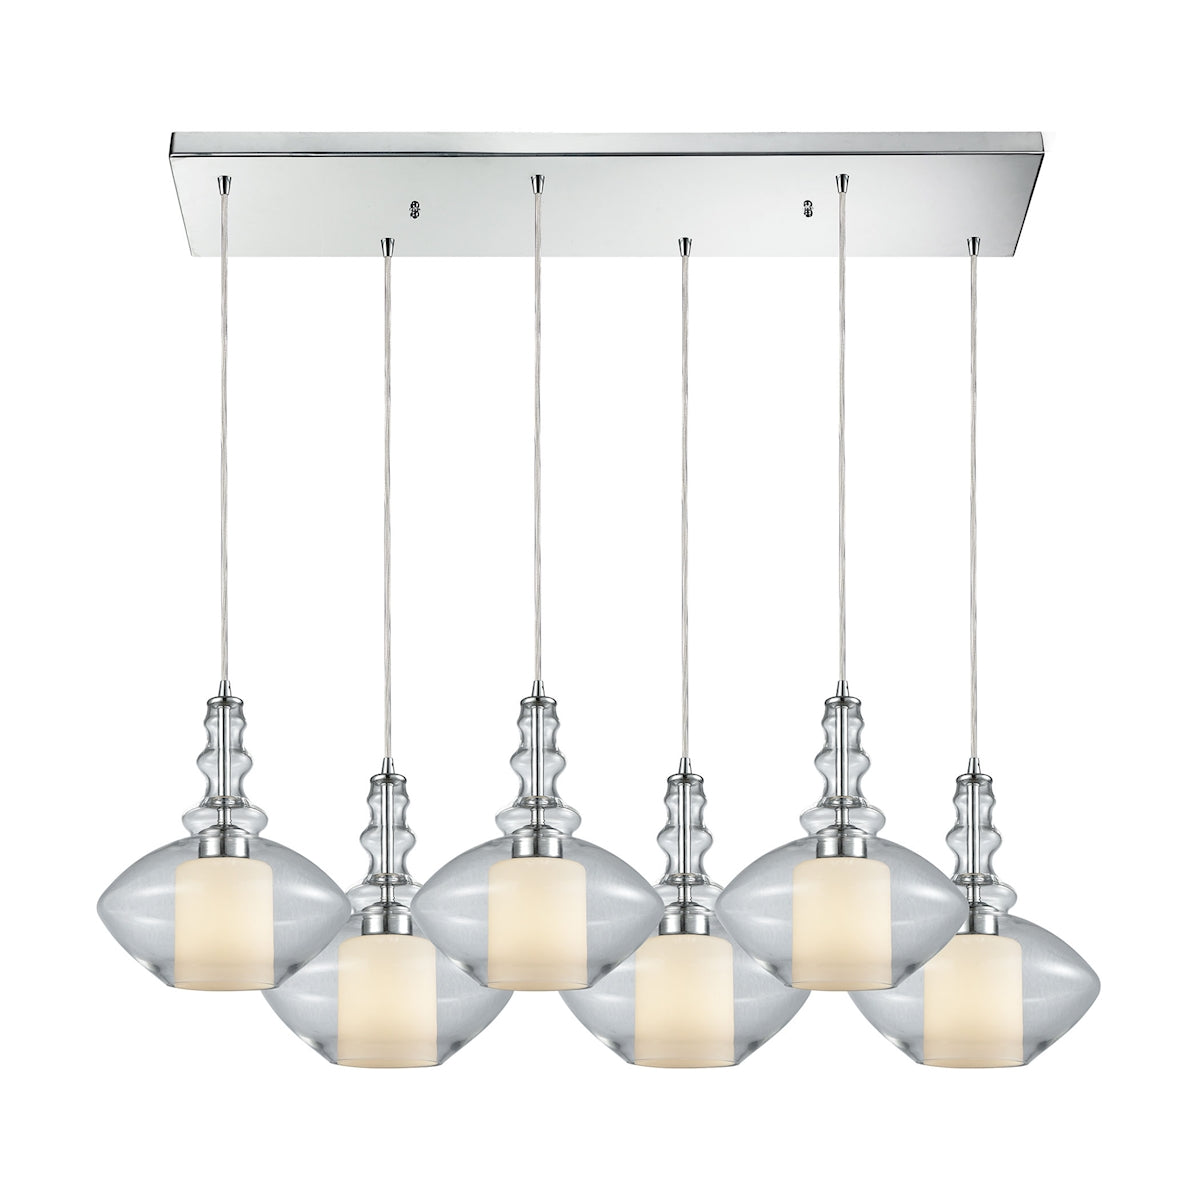 ELK Lighting 56500/6RC Alora 6-Light Rectangular Pendant Fixture in Chrome with Clear and Opal White Glass